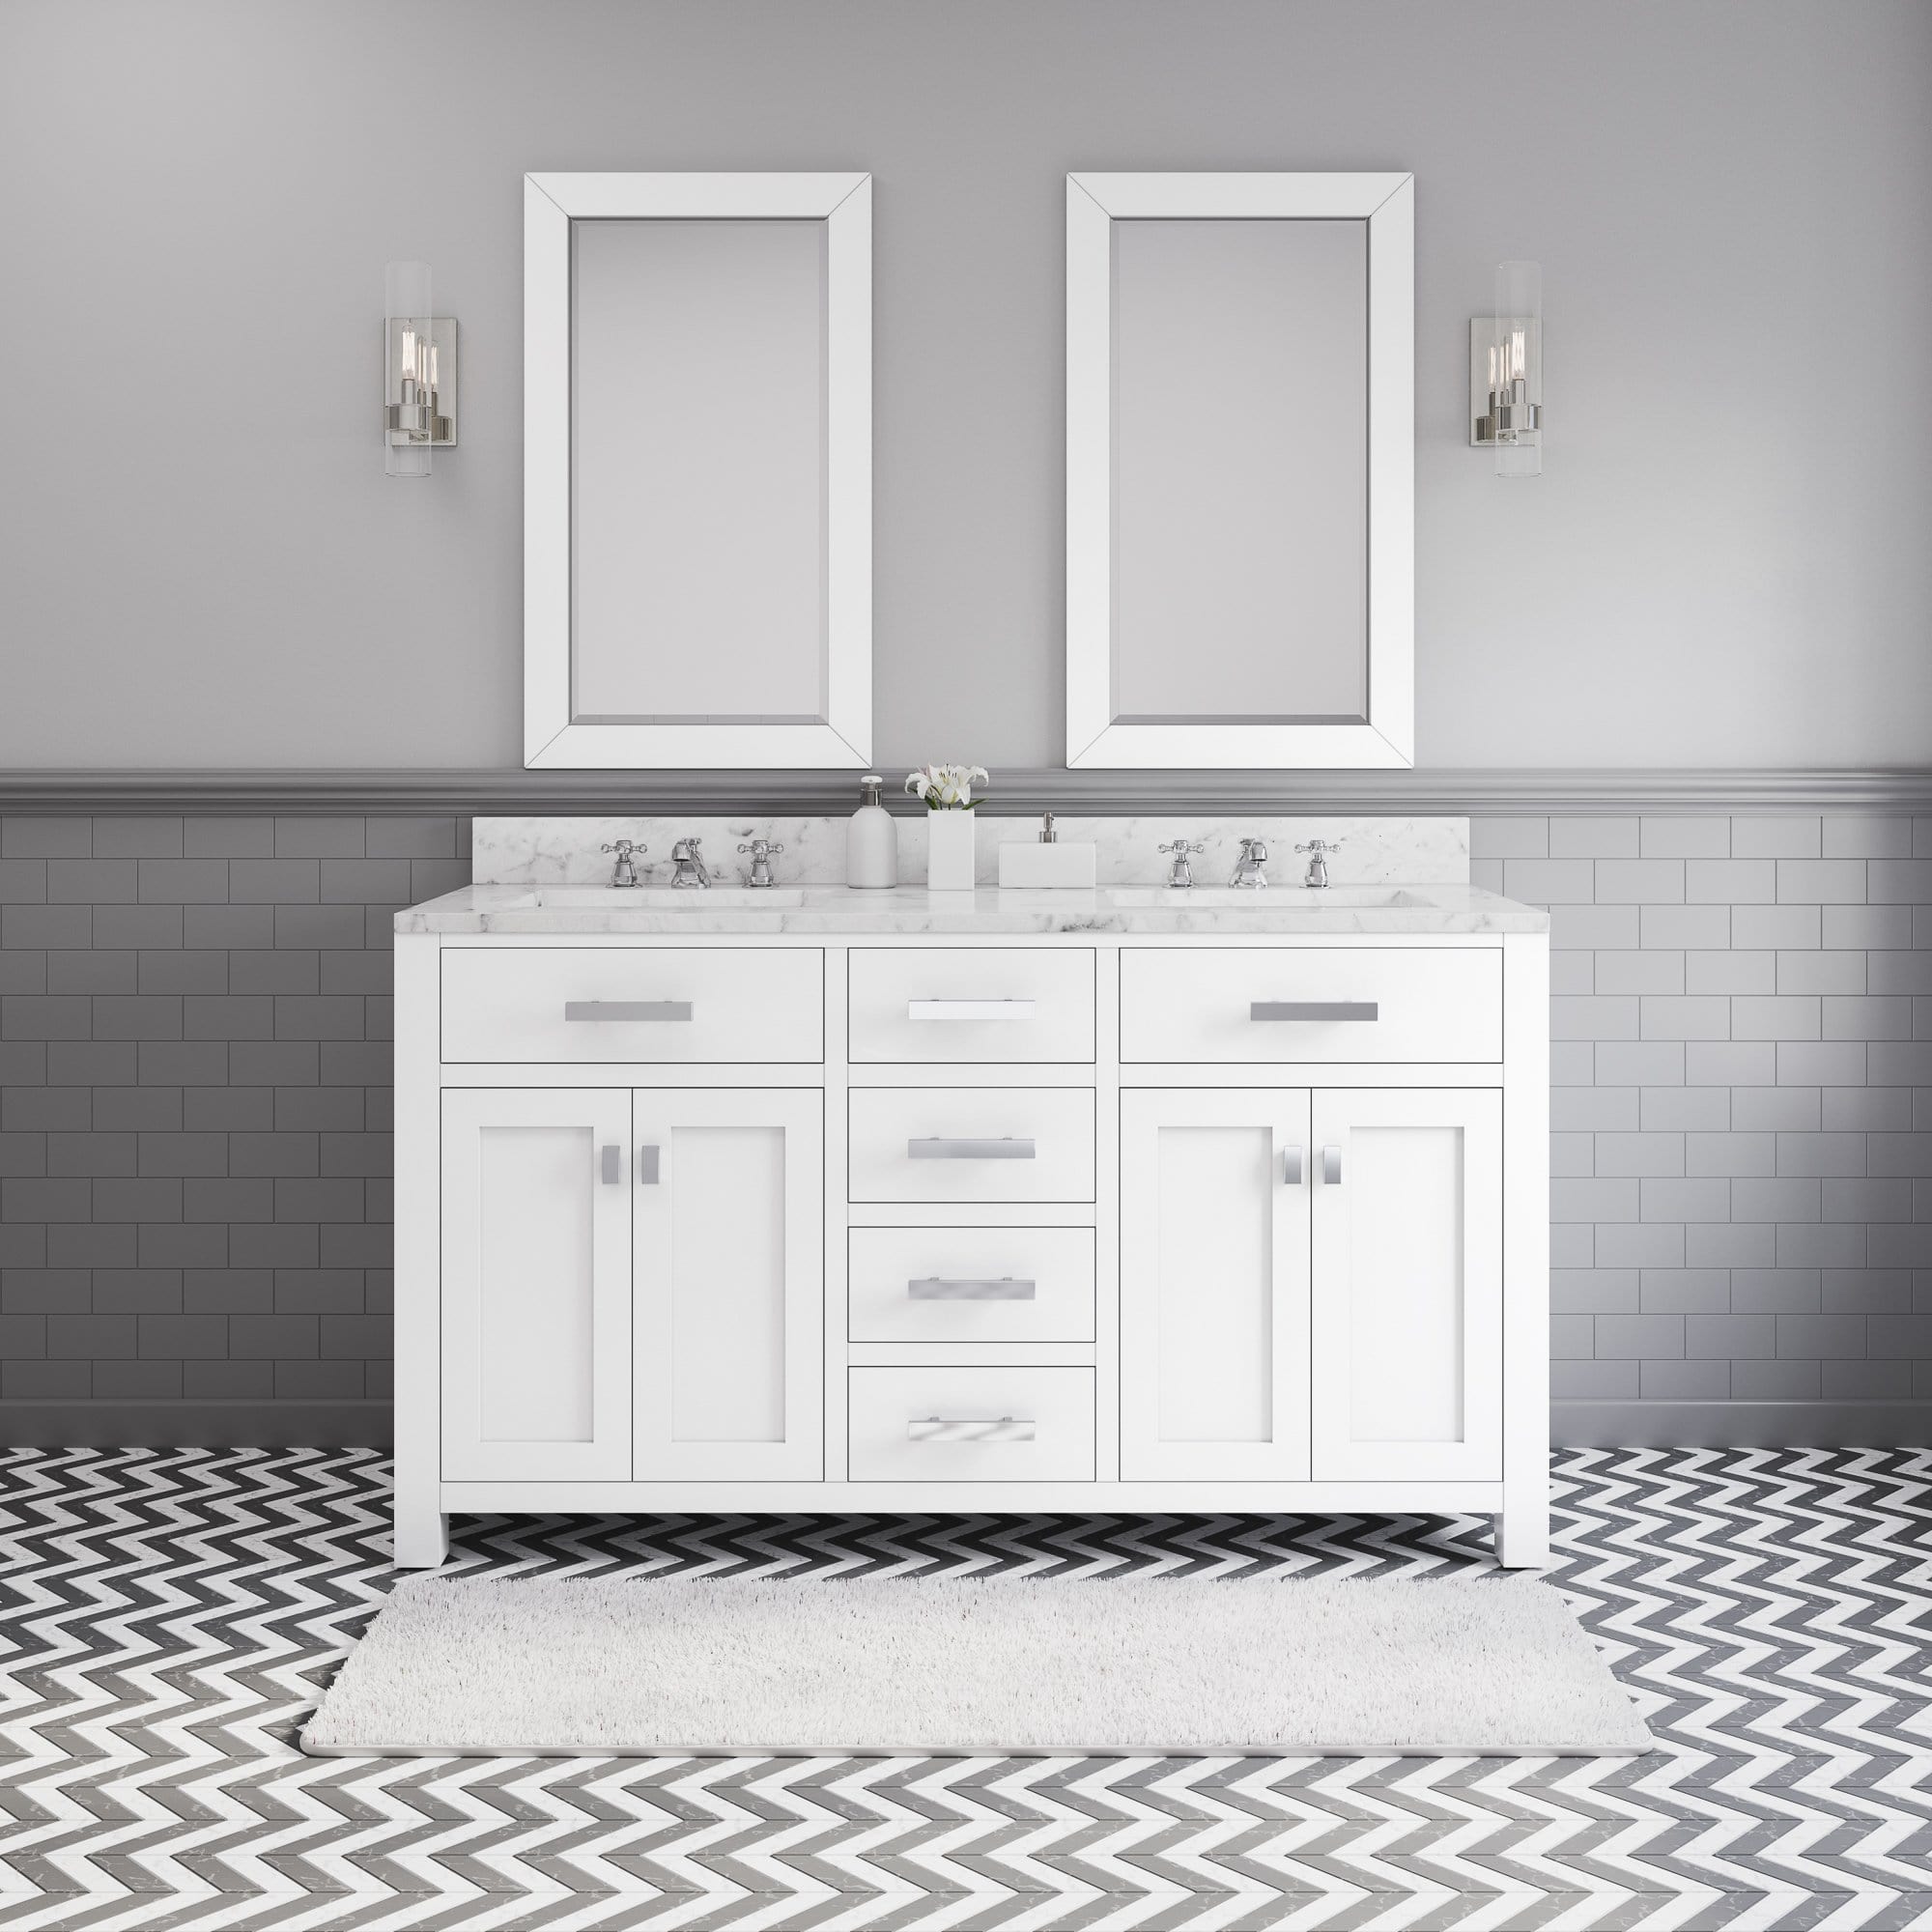 Water Creation 60 Inch Pure White Double Sink Bathroom Vanity With 2 Matching Framed Mirrors And Faucets From The Madison Collection - Molaix700621683810Bathroom vanityMS60CW01PW-R21BX0901